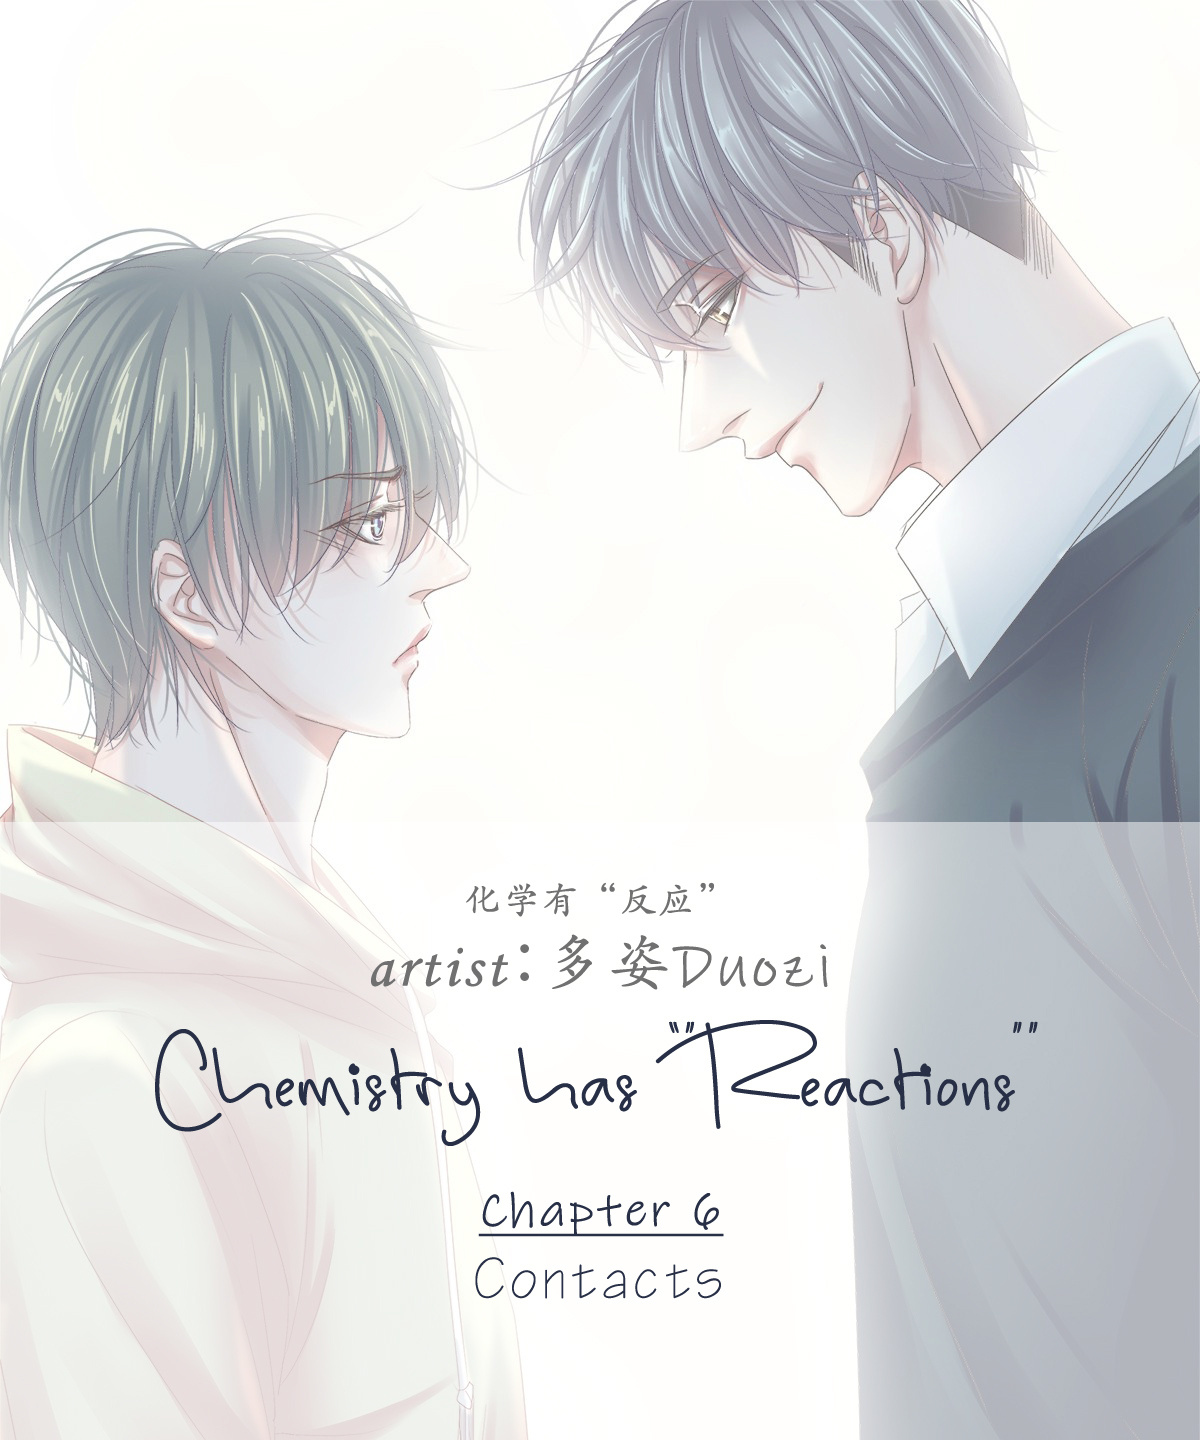 Chemistry Has "reactions" Chapter 6 #1